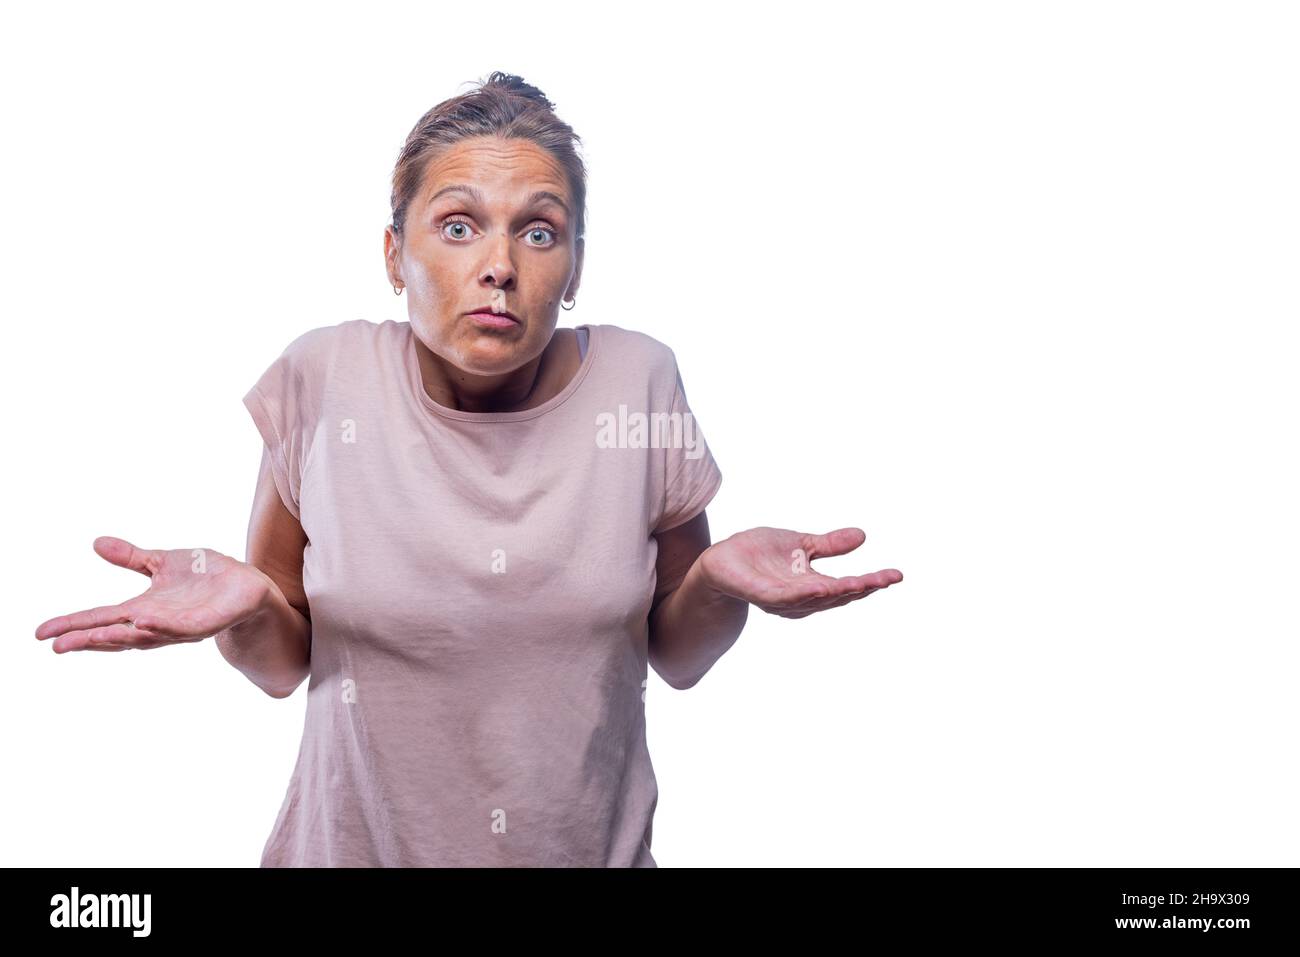 An adult woman looks doubtfully on a white background Stock Photo